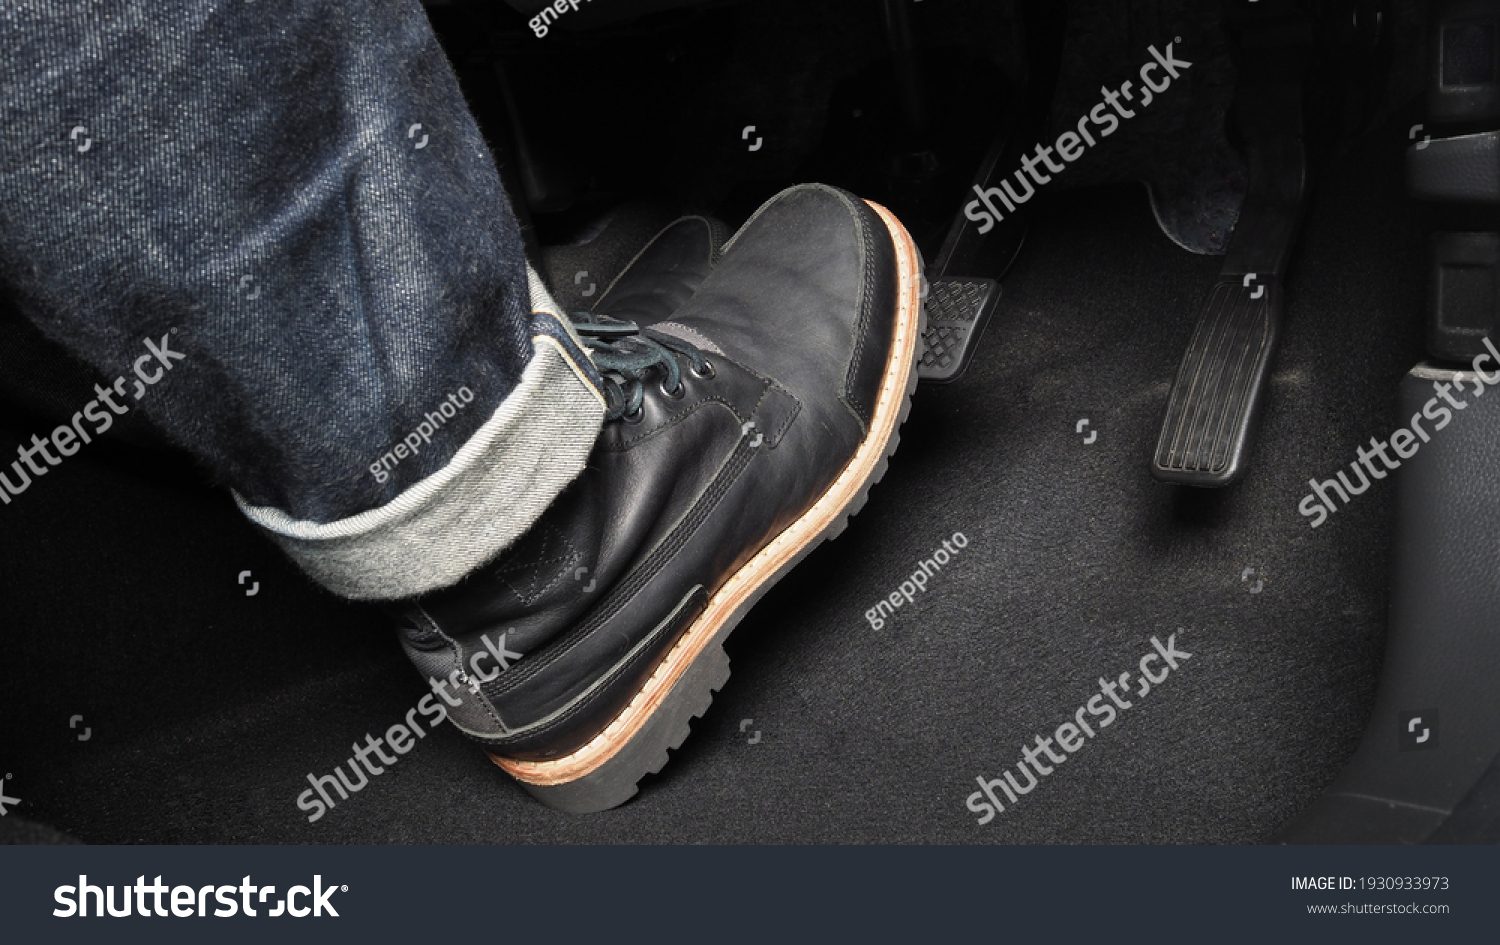 Accelerator and breaking pedal in a car. Close up the foot pressing foot pedal of a car to drive ahead. Driver driving the car by pushing accelerator pedals of the car. inside vehicle. 
 #1930933973